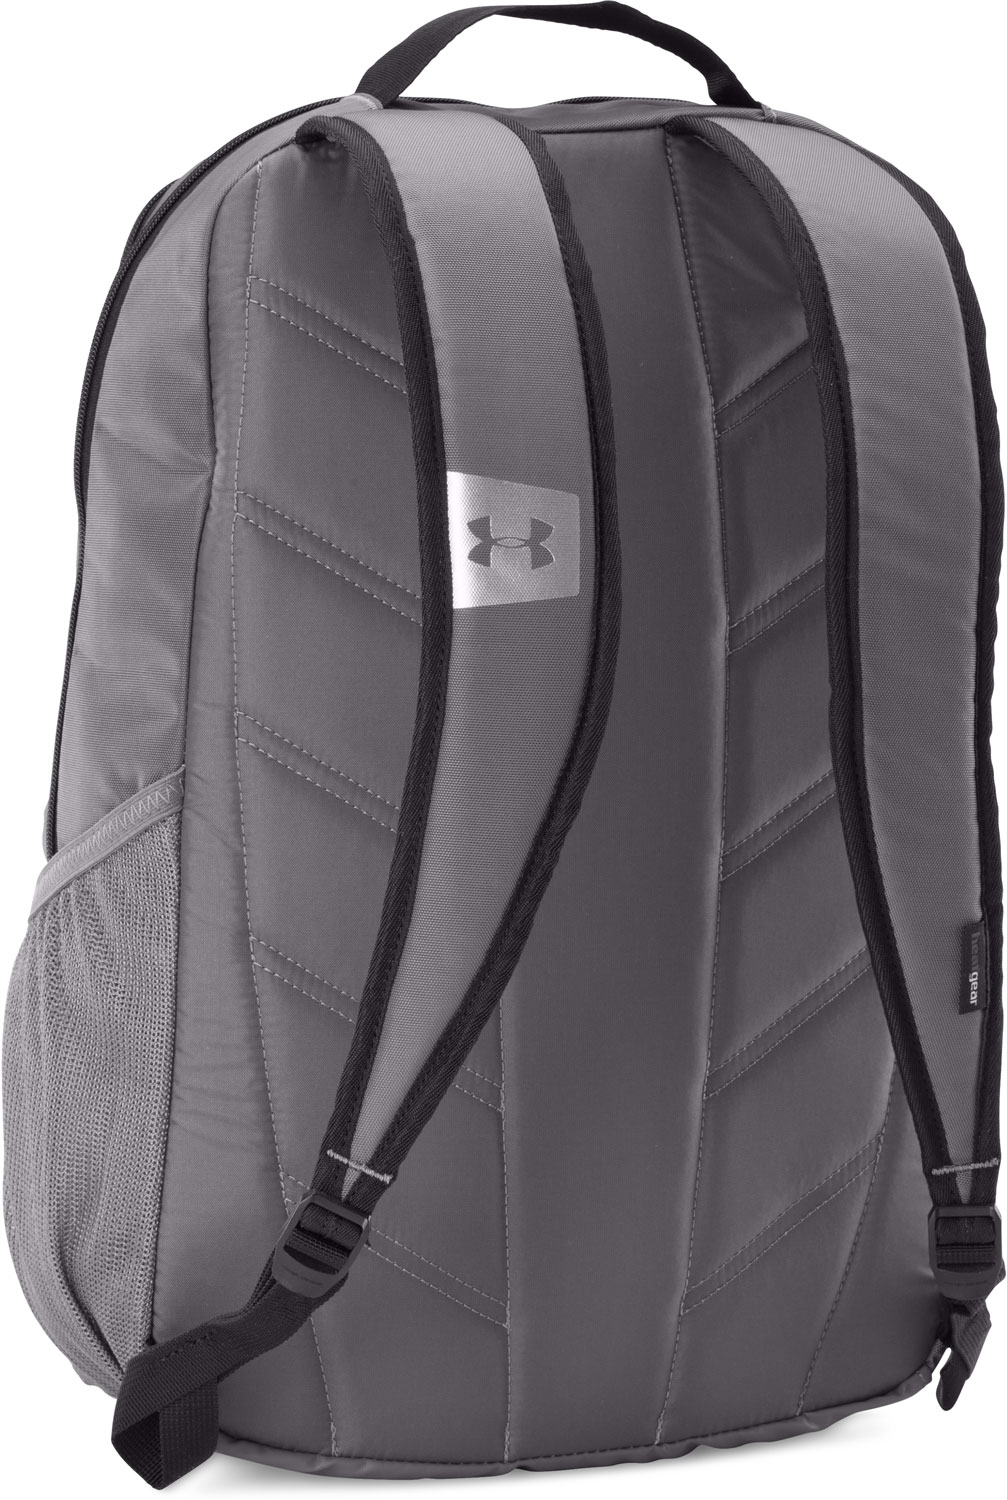 Durable backpack